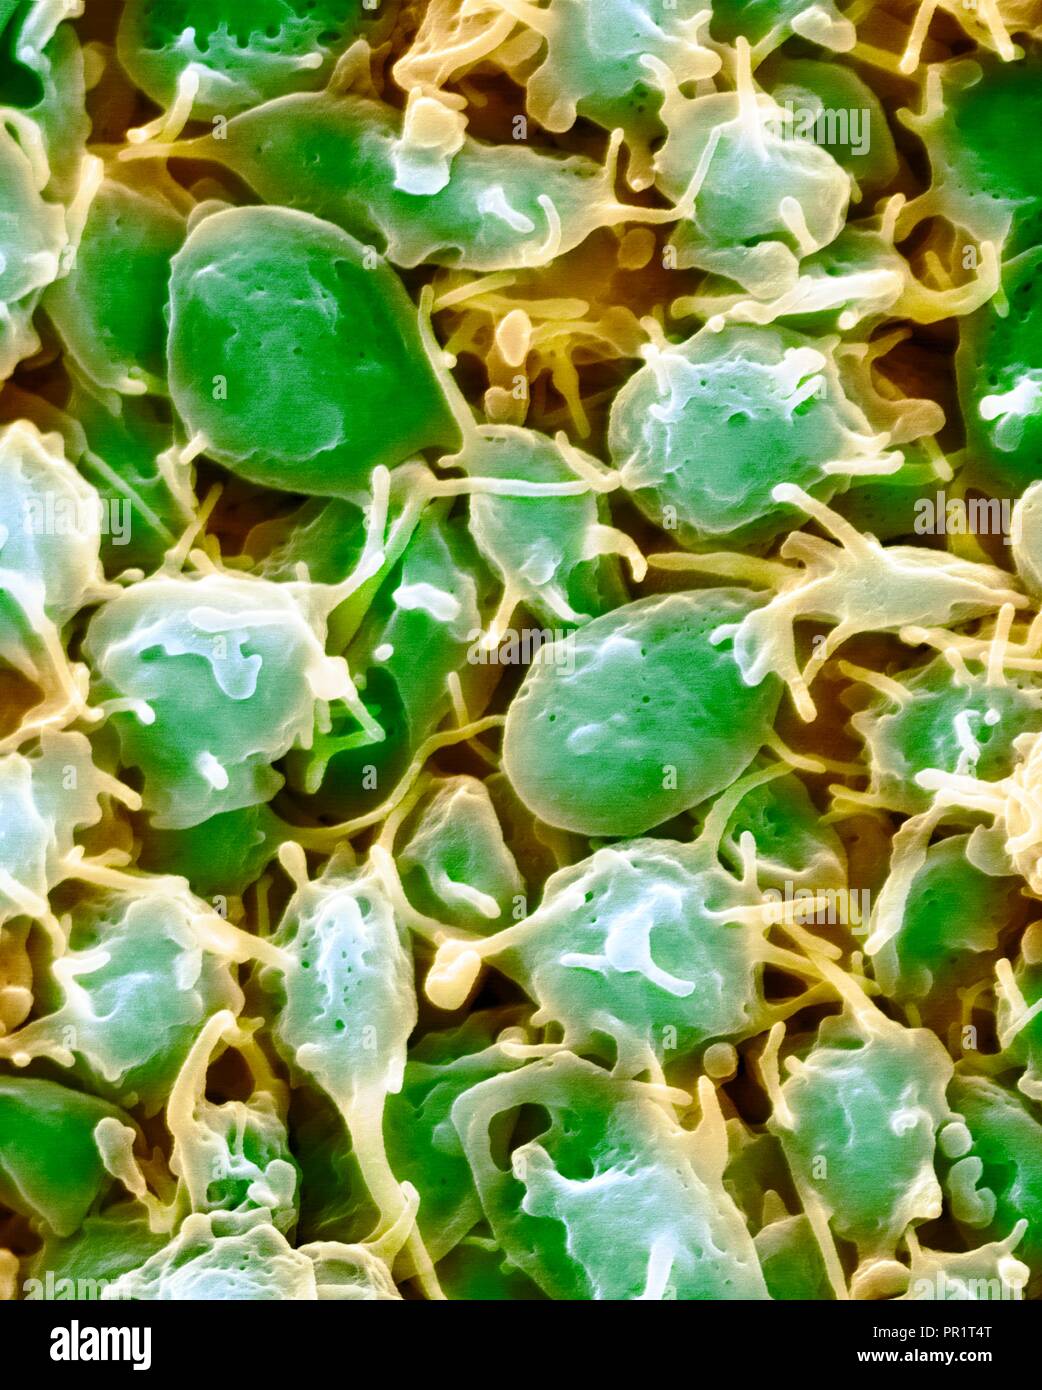 Activated platelets, coloured scanning electron micrograph (SEM). Platelets are blood cell fragments that play an essential role in blood clotting and wound repair, and can also activate certain immune responses. They are formed in the red bone marrow, lungs, and spleen by fragmentation of very large cells known as megakaryocytes. Platelets in the blood are small oval disks and are termed non-activated platelets or thrombocytes. They are the body's first line of defence against excessive blood loss. Magnification: x2,000 at 10 cm wide. Stock Photo